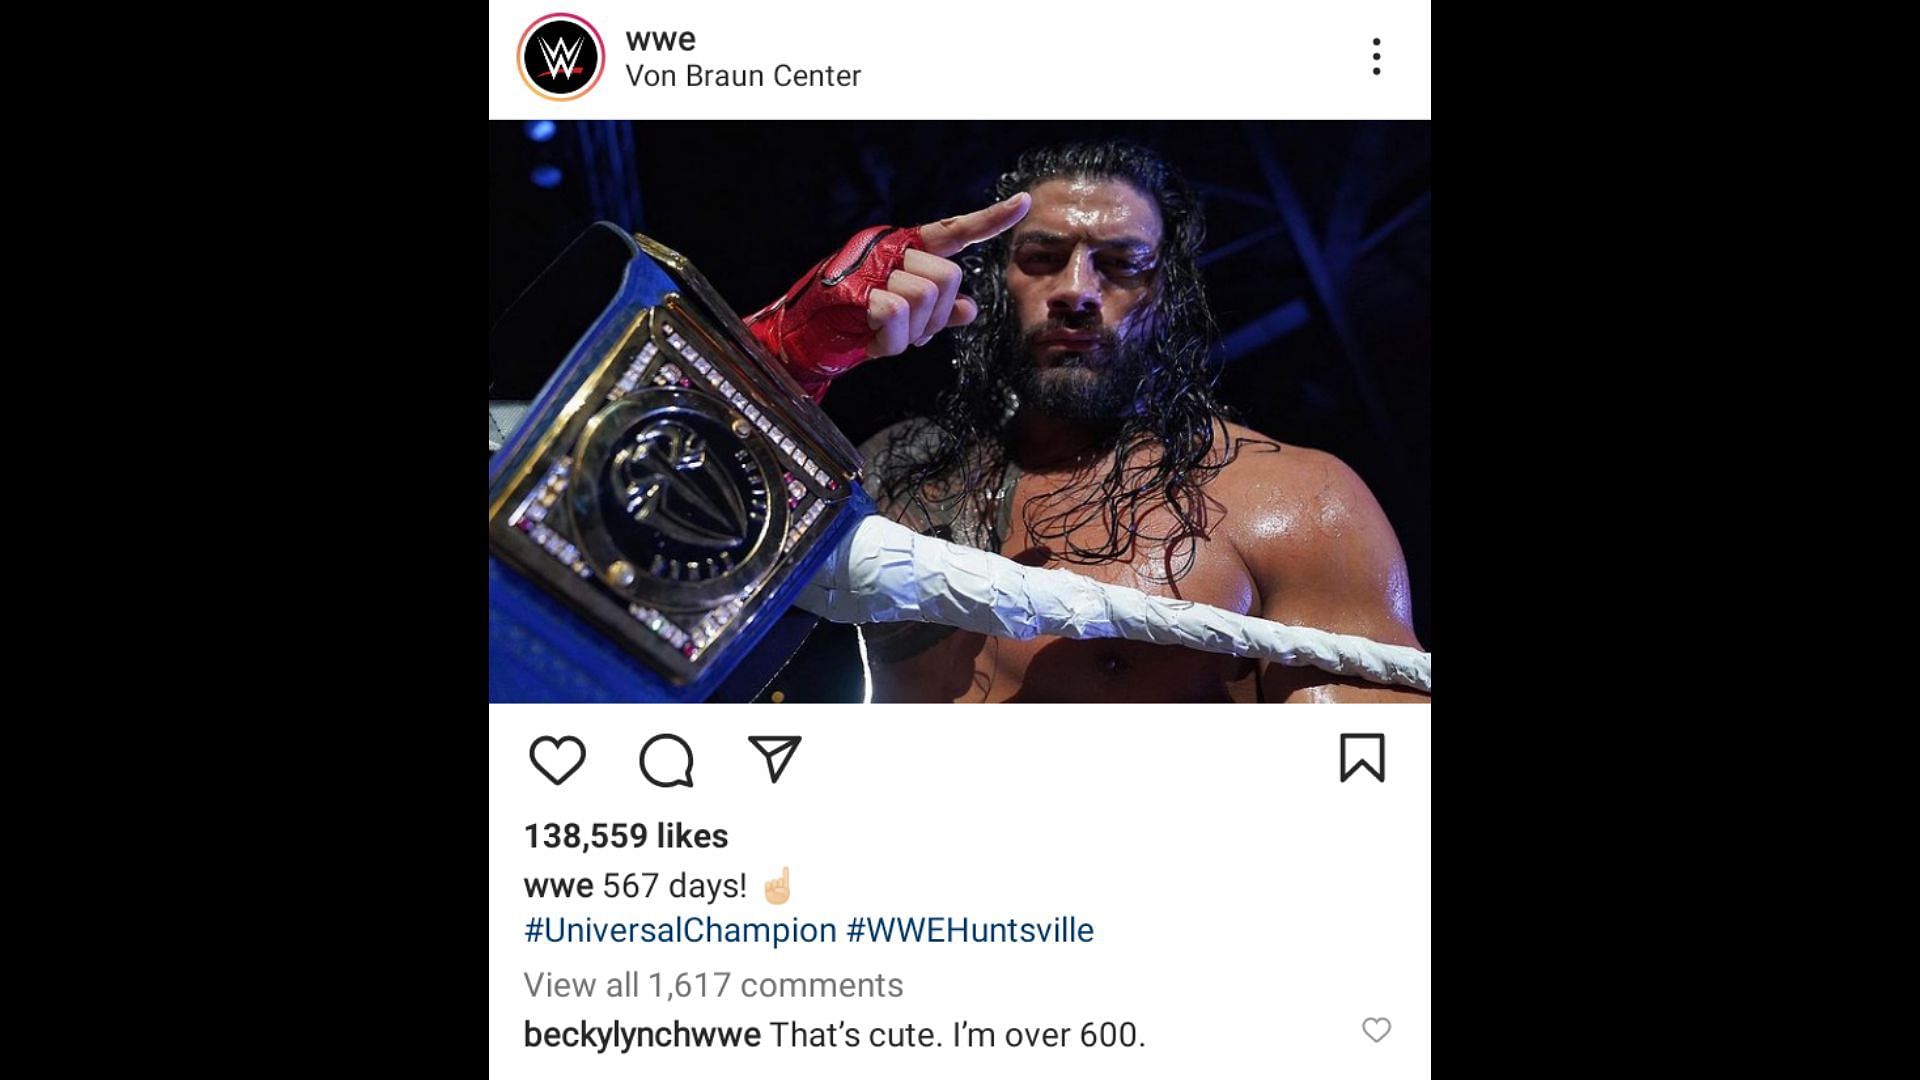 Becky Lynch commented on WWE's post